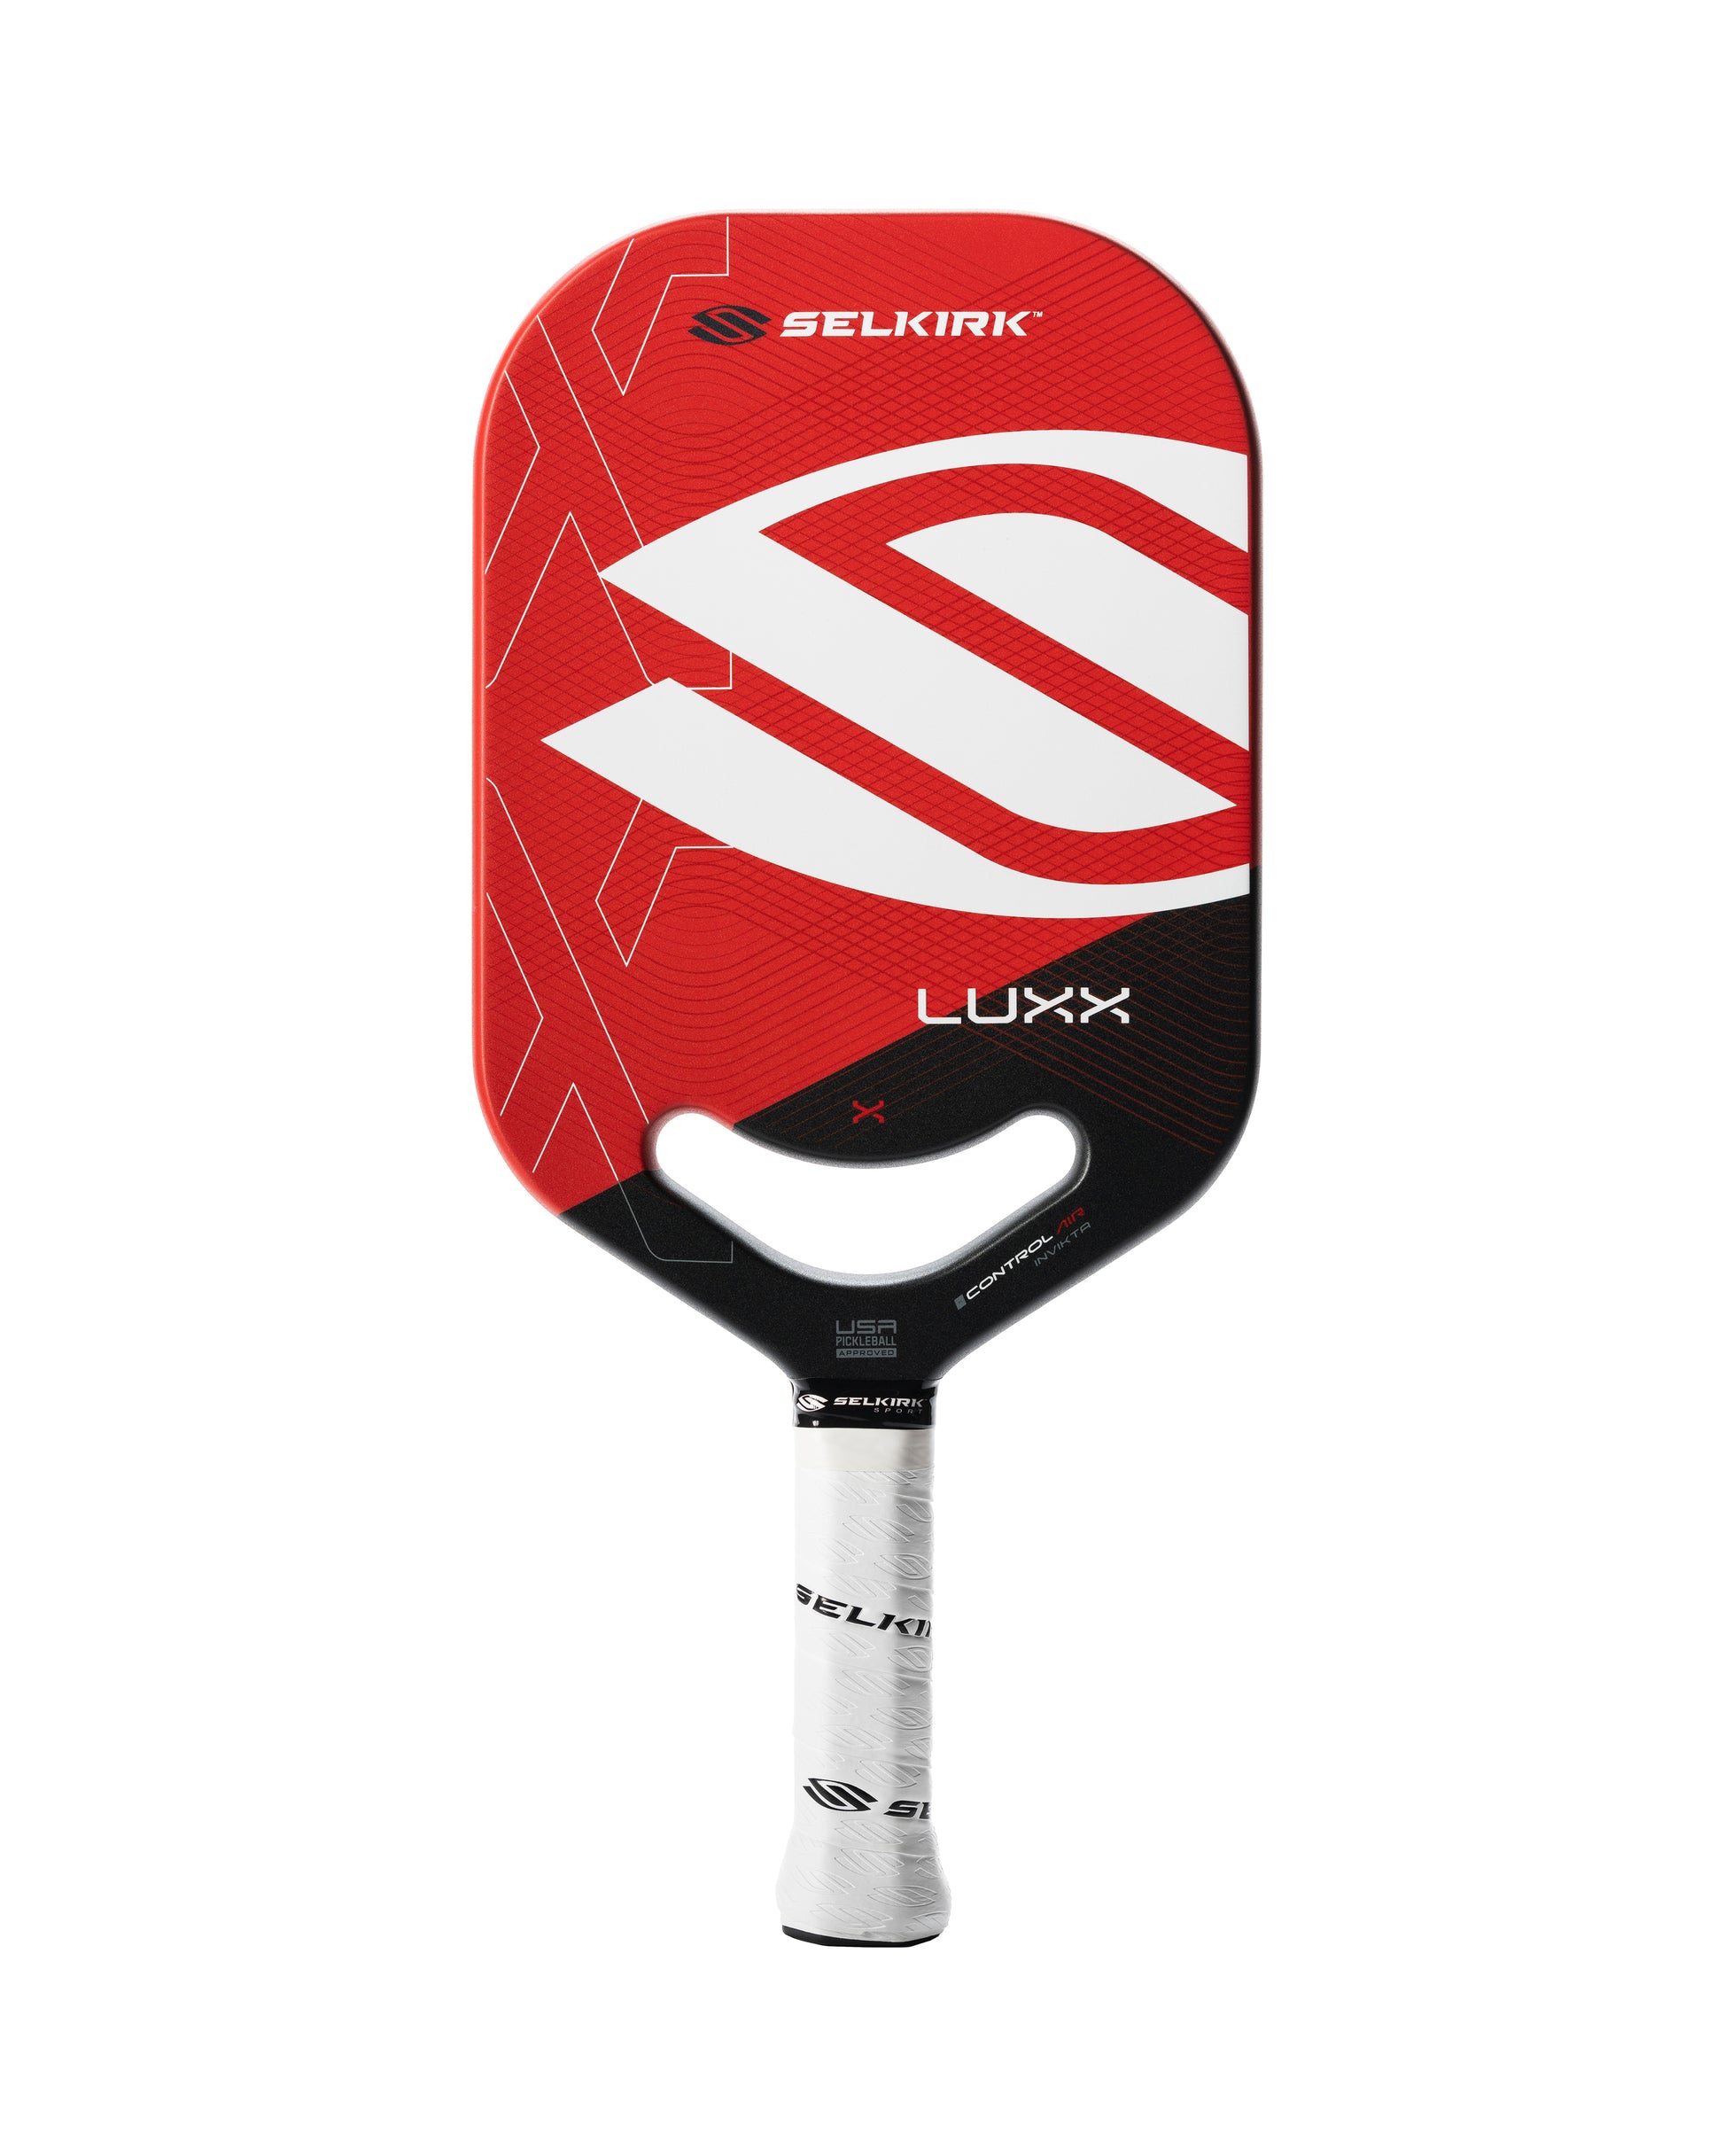 A Selkirk LUXX Control Air Invikta pickleball paddle for control on a white background.